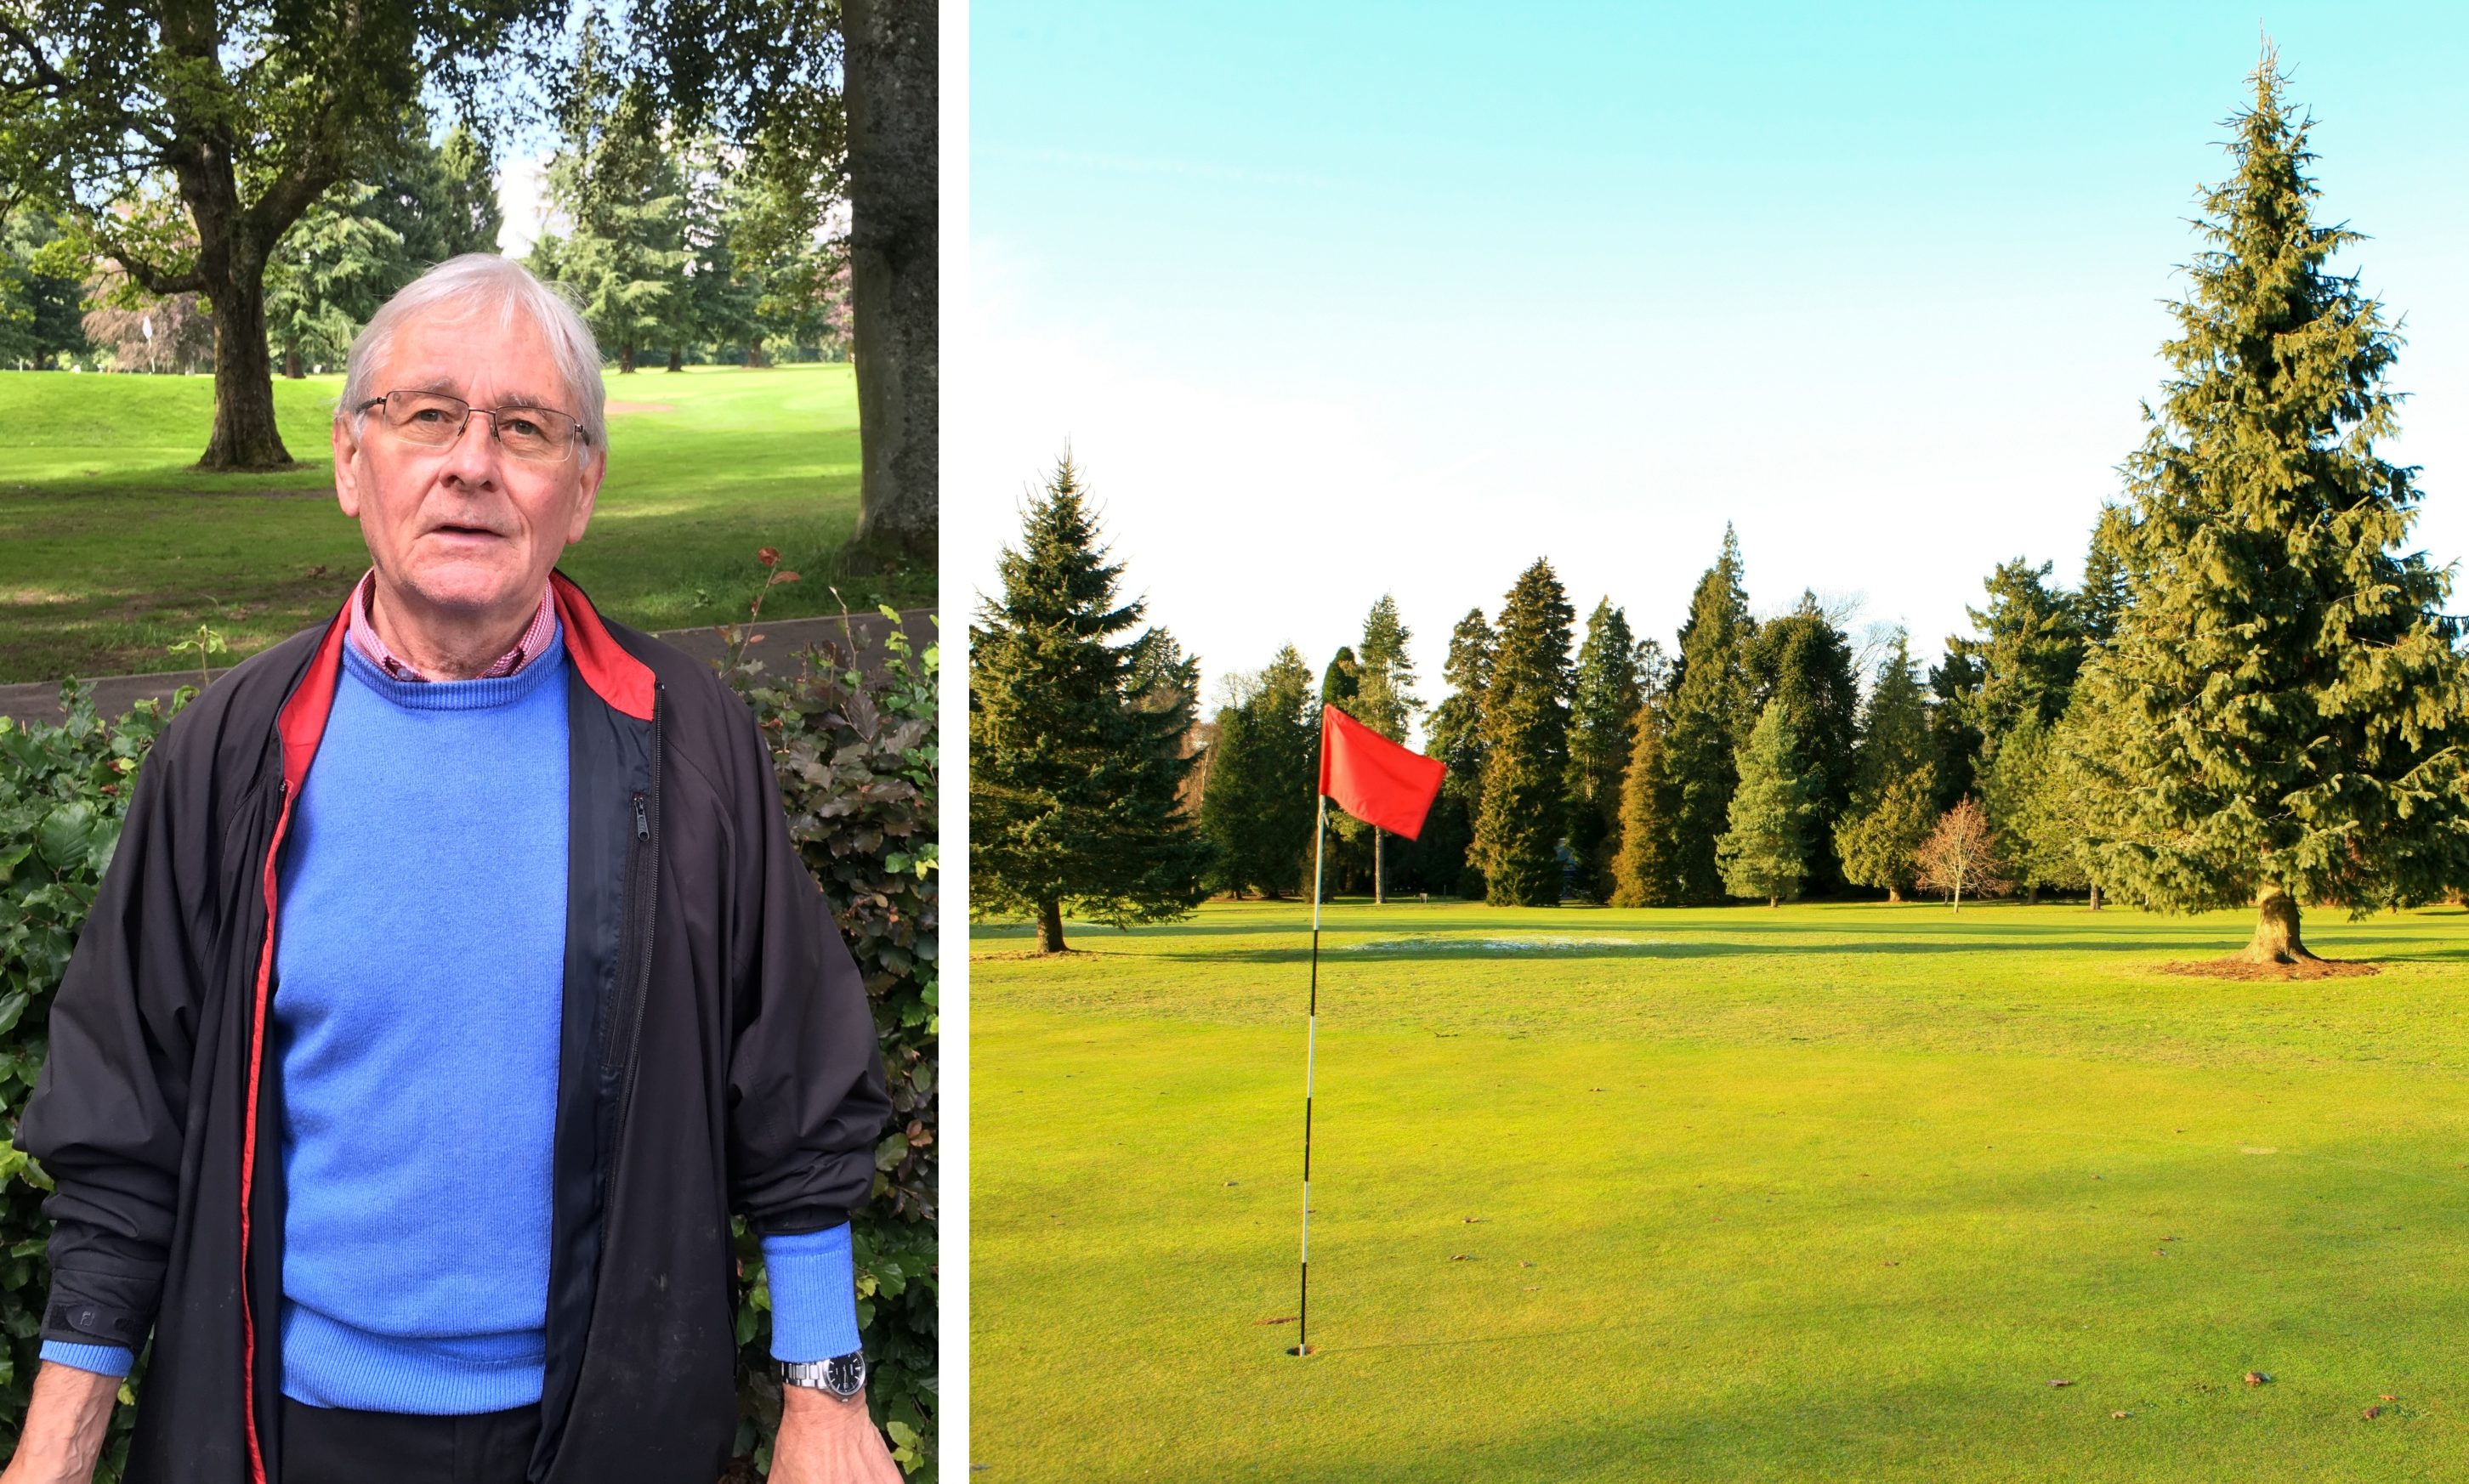 Camperdown golf pro Roddy Brown has hit out at the plans to close the course.